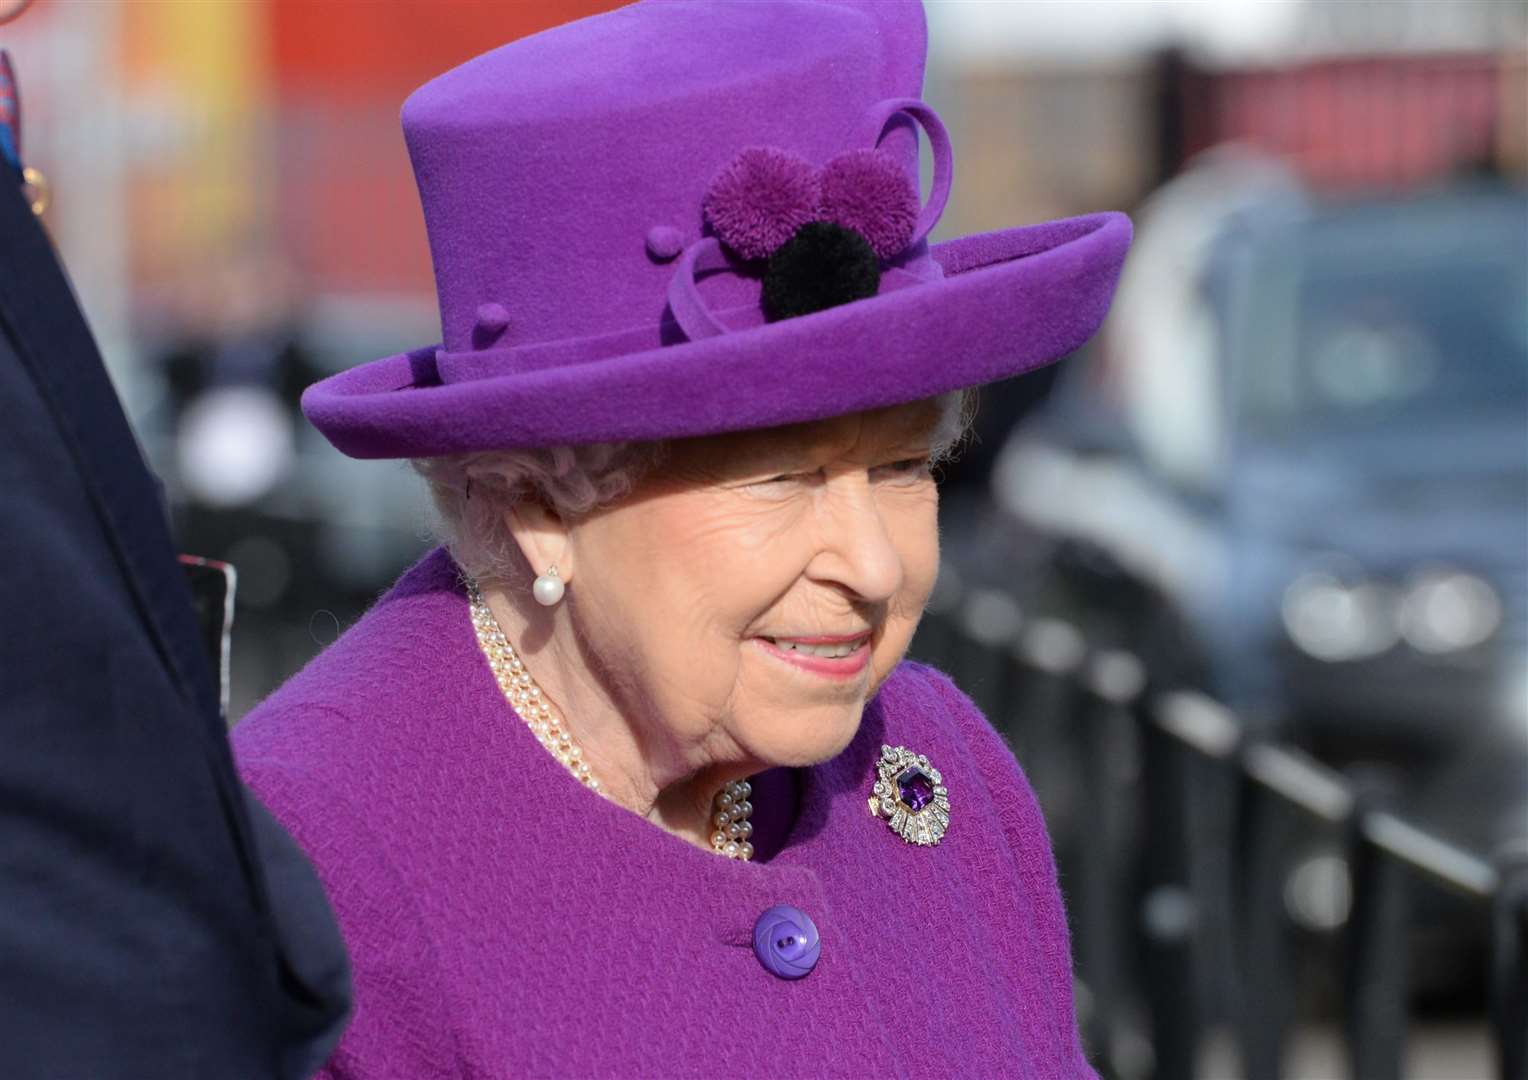 The Queen's Platinum Jubilee takes place on June 4, 2022